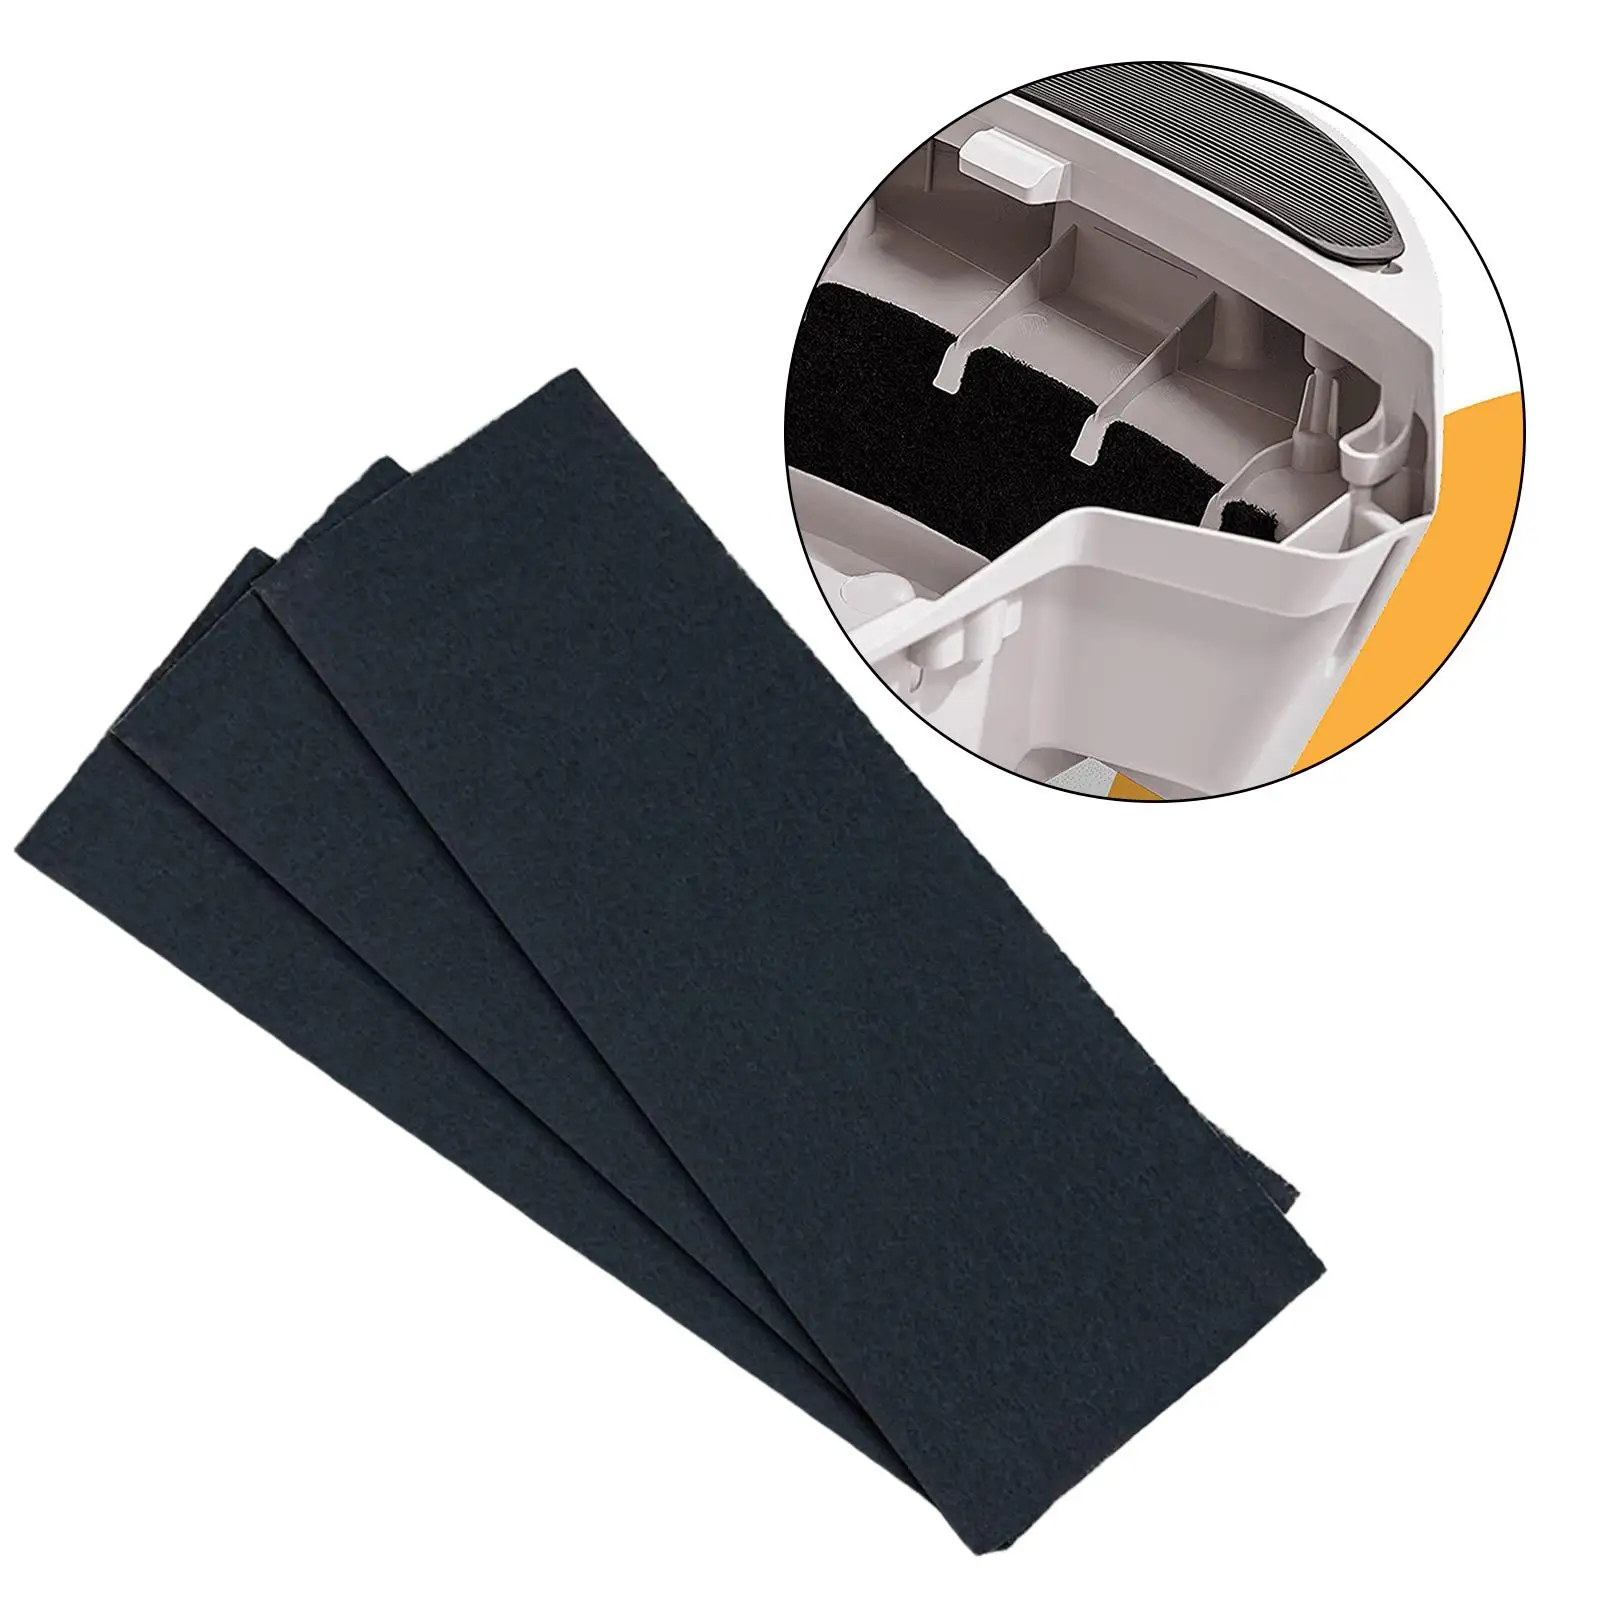 3 Pieces Replacement Filter Controls Moisture Absorbs Odors Keep Your Home Litter Box Carbon Filters for Litter Box Cabinet